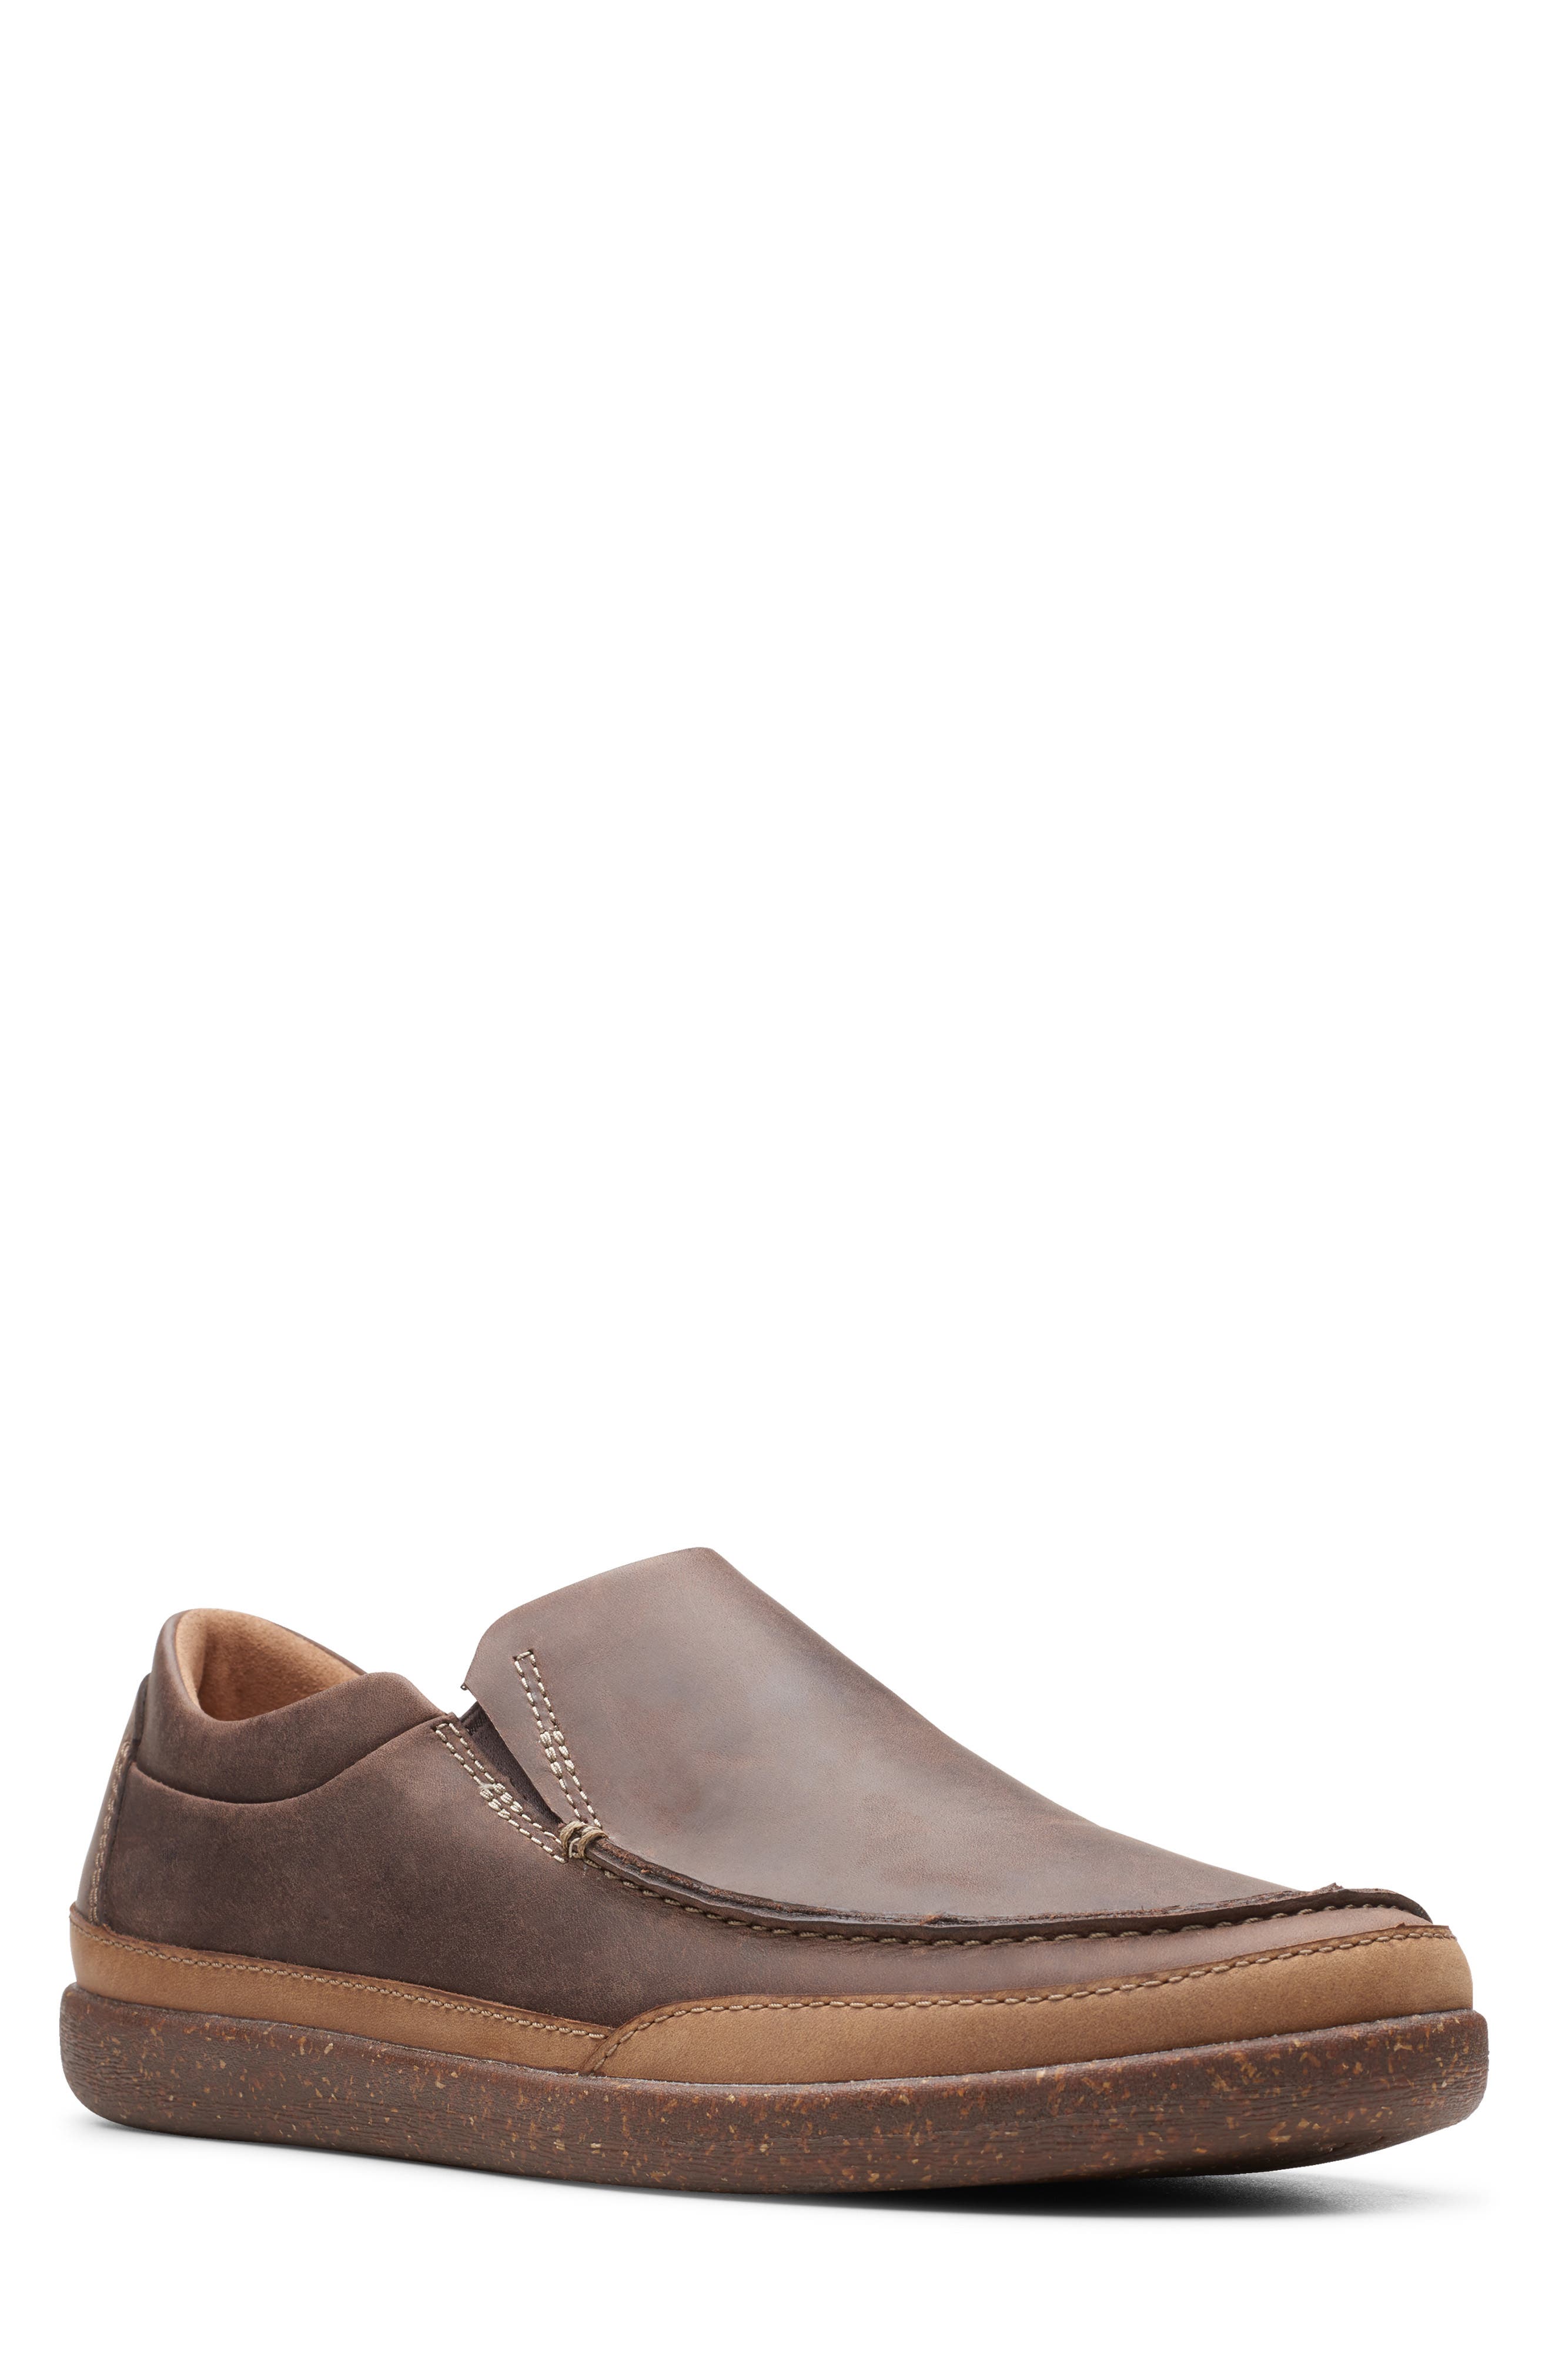 clarks occasion shoes